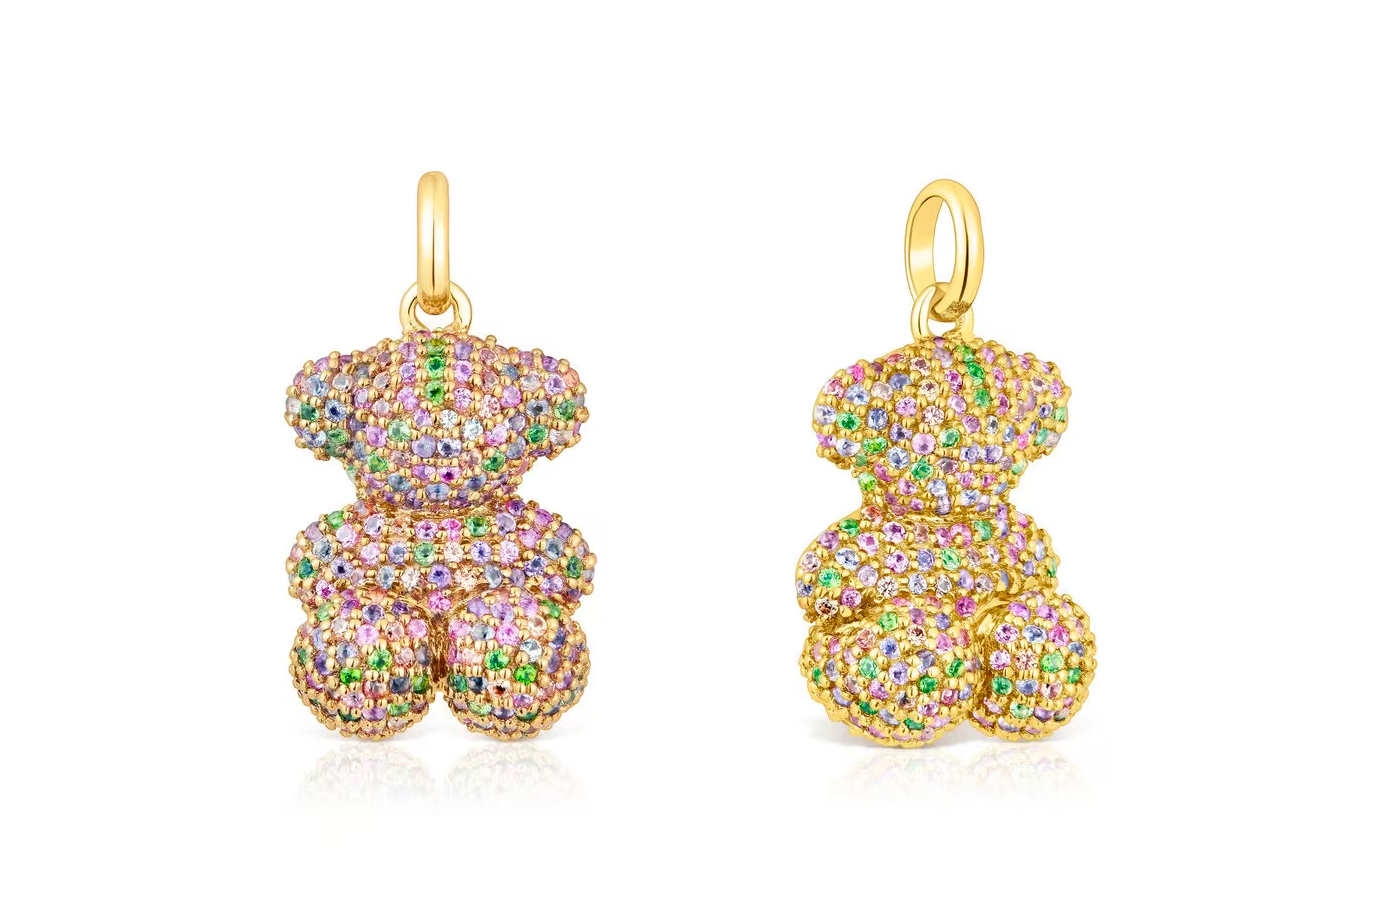 The Sweetest Thing: Adorably Cute Fine Jewellery